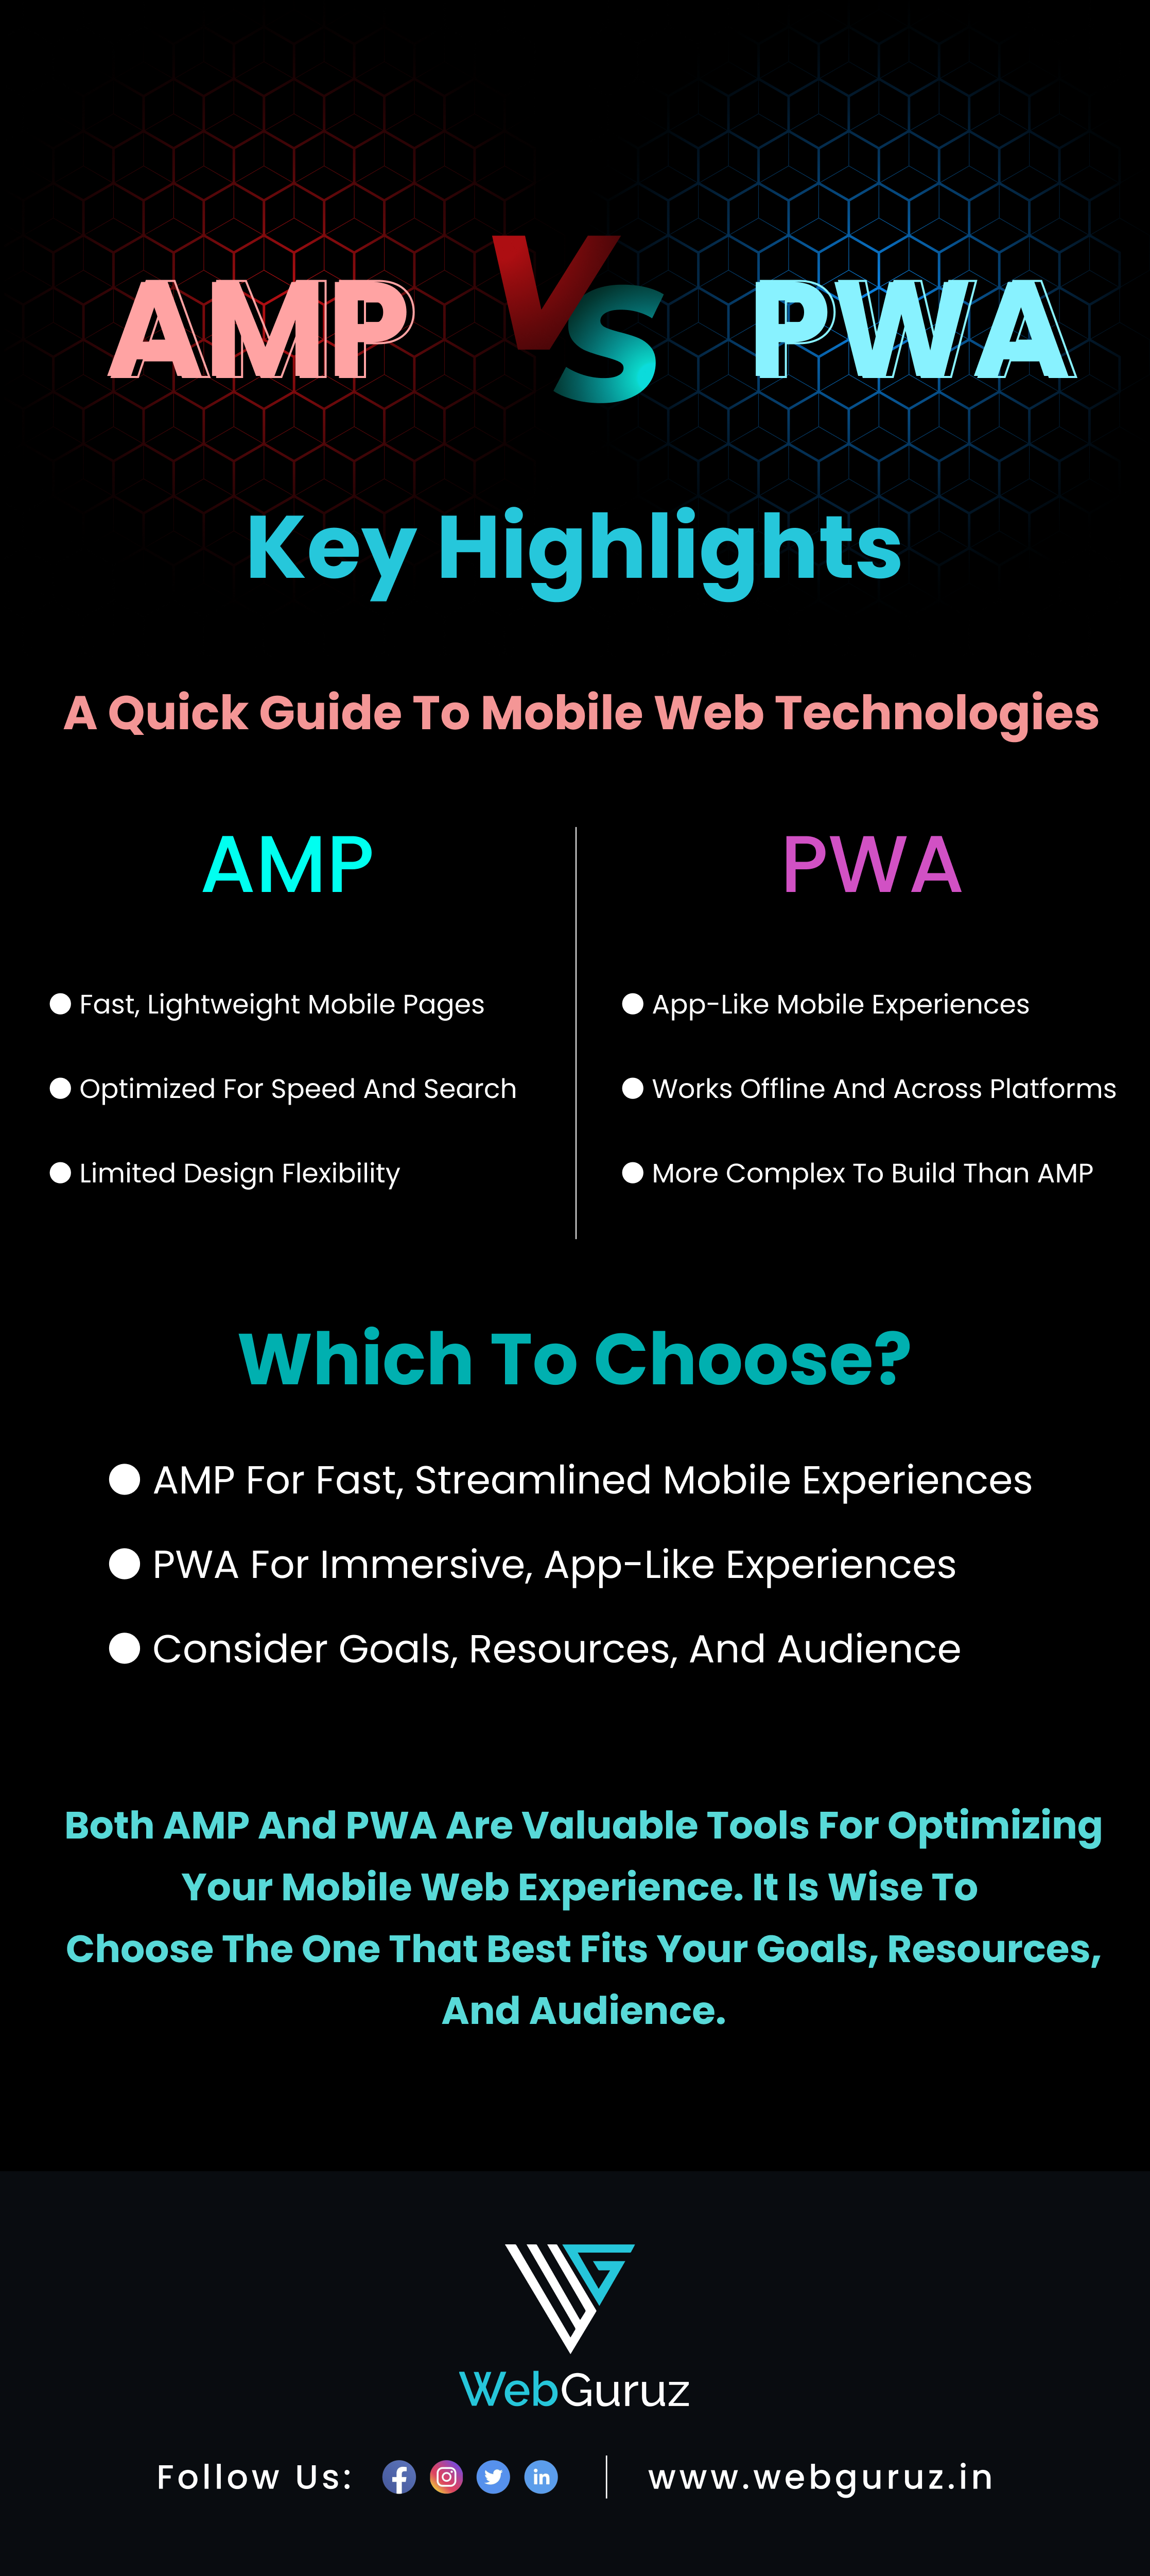 AMP vs. PWA: Which is Better for Your Mobile Website?